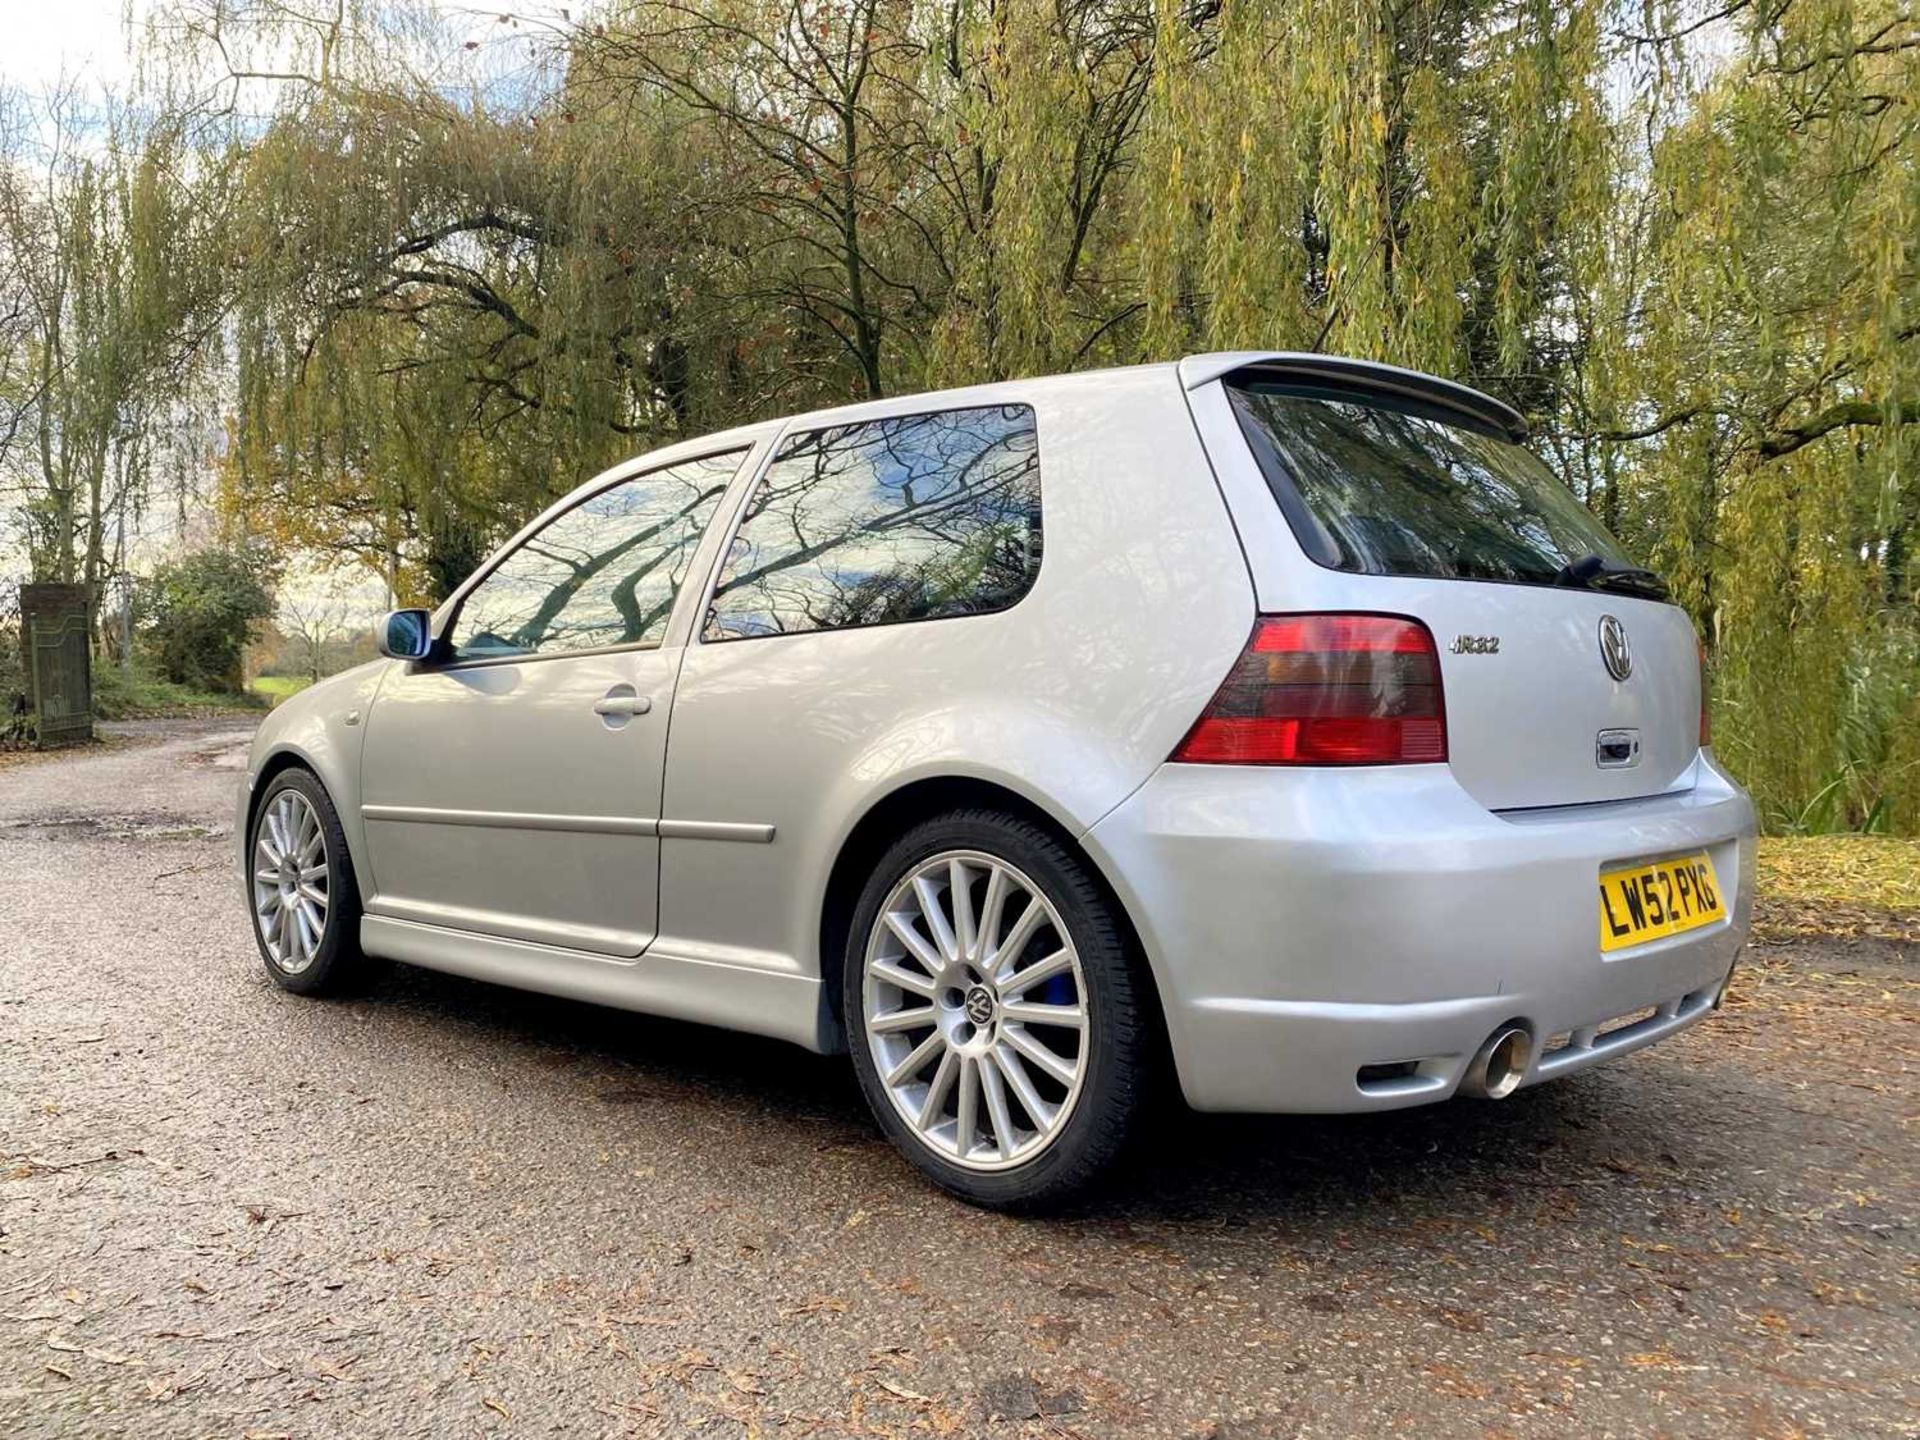 2003 Volkswagen Golf R32 In current ownership for sixteen years - Image 28 of 94